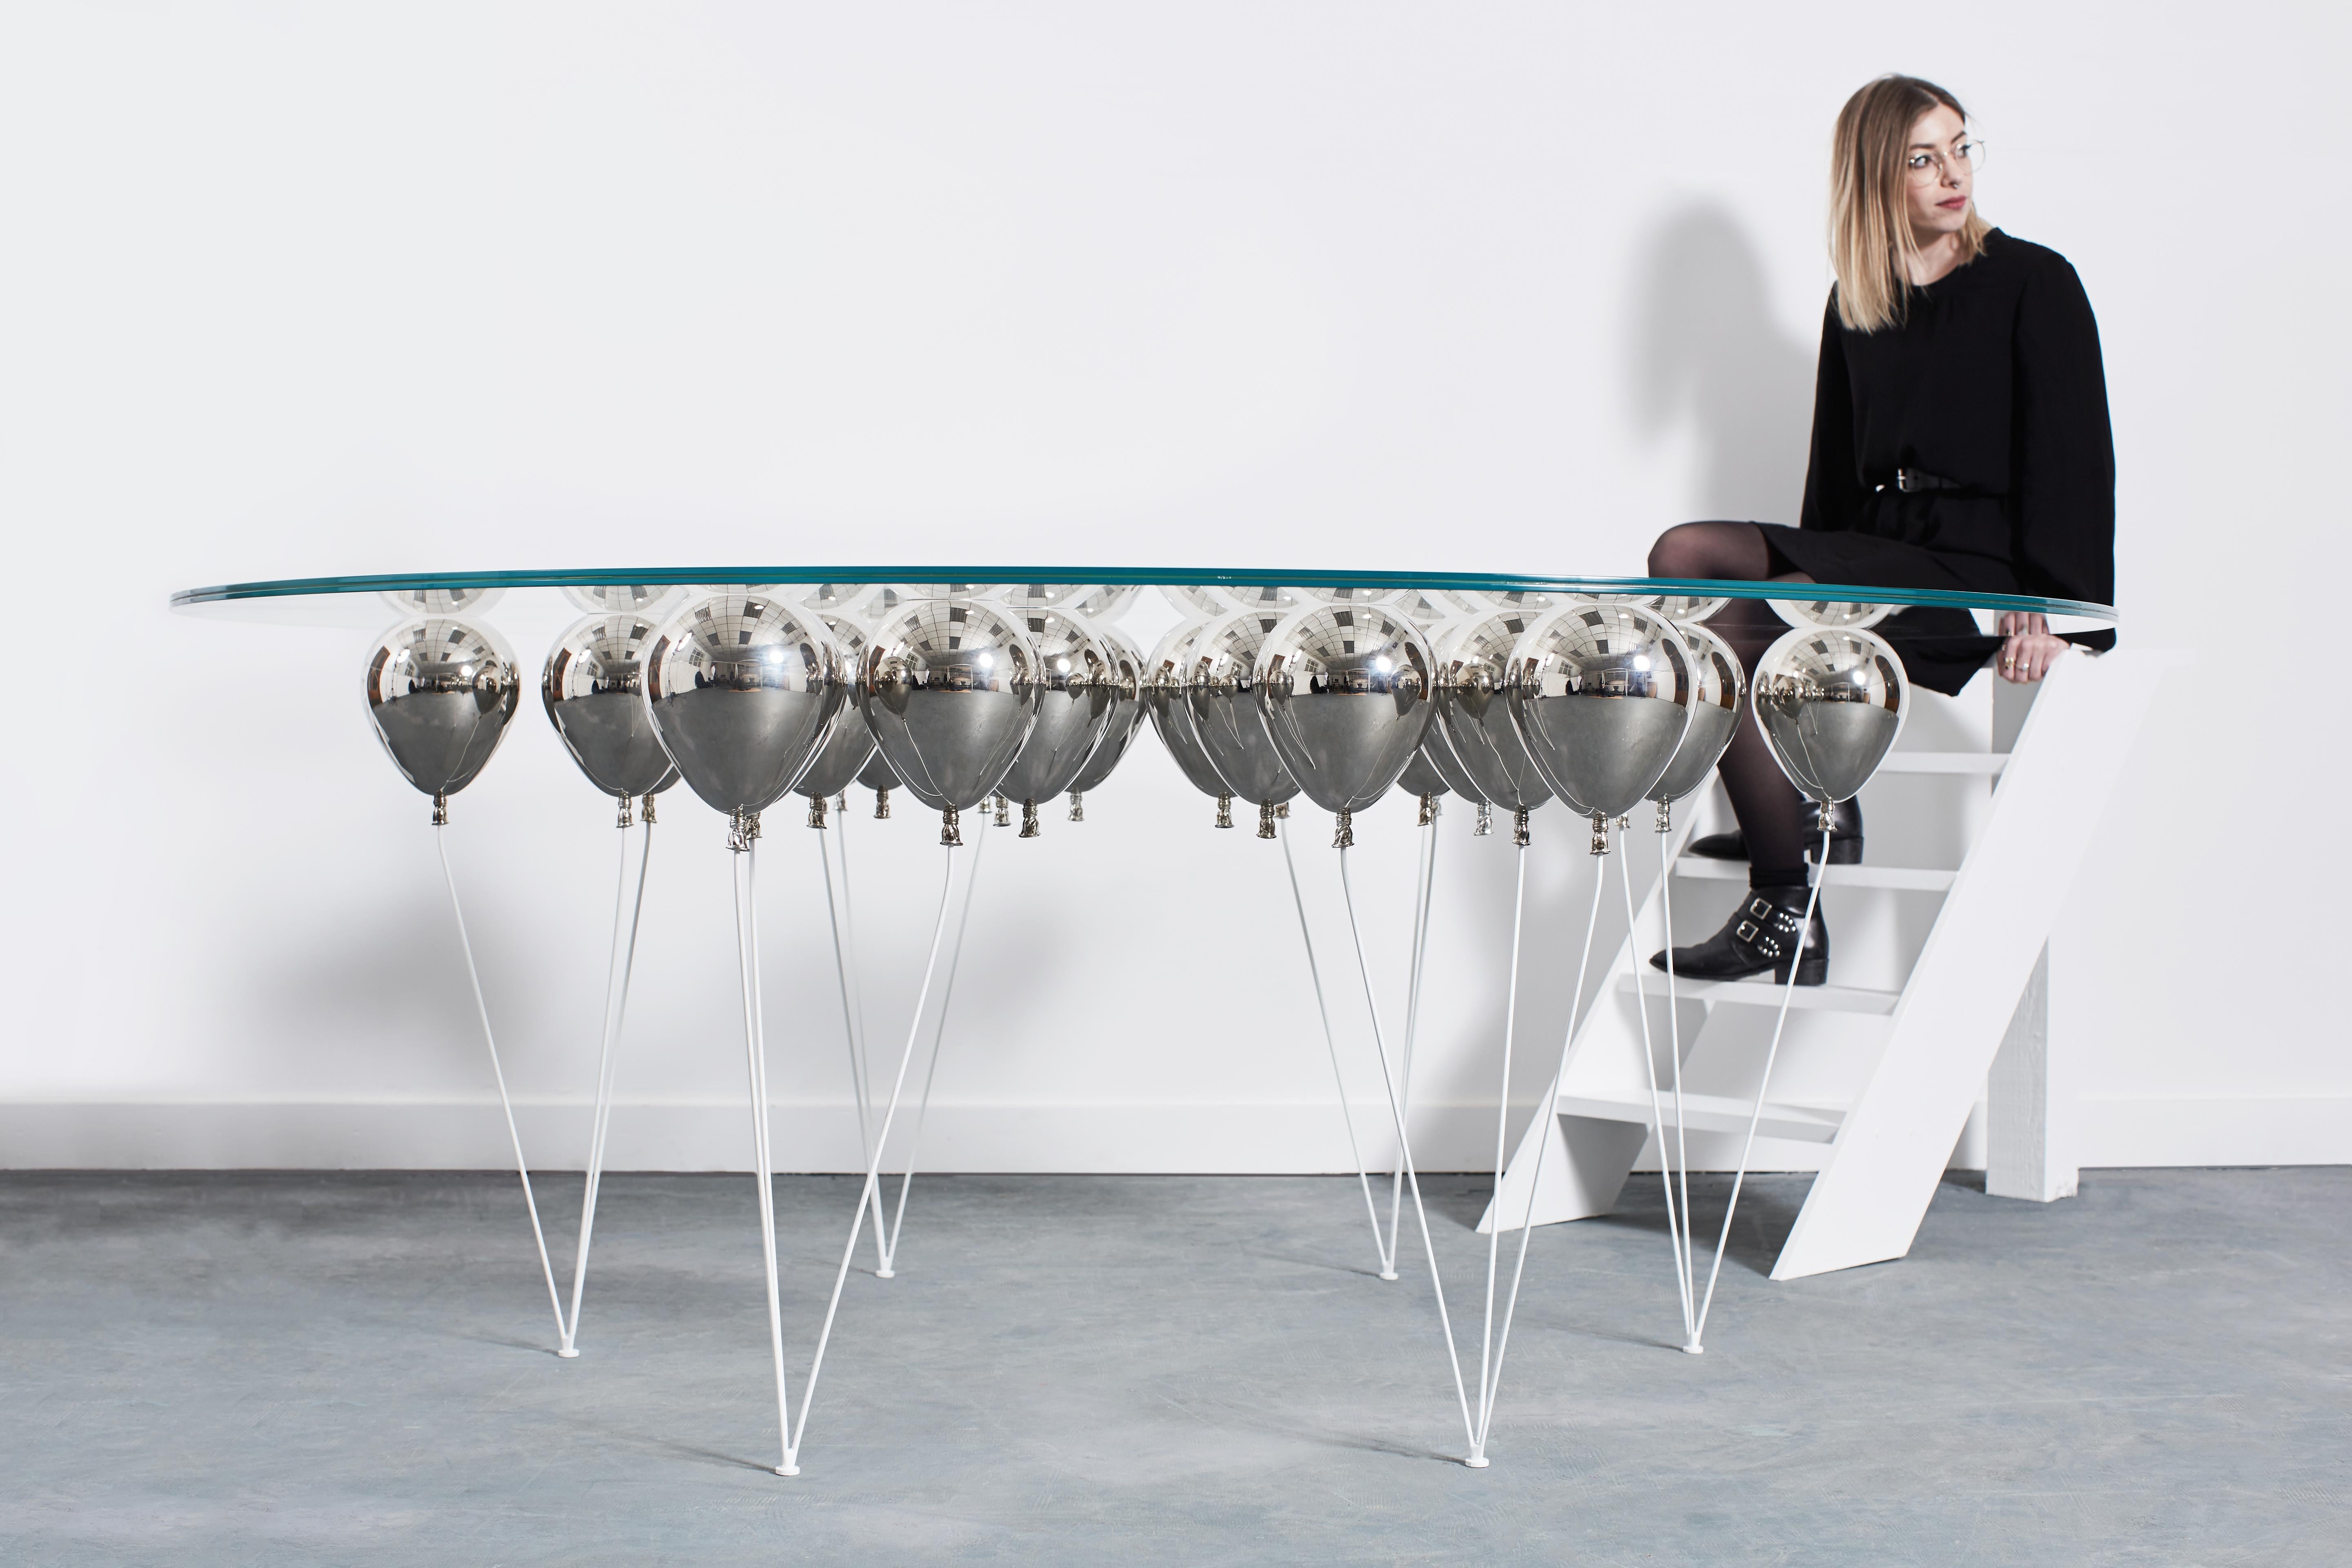 The UP Balloon Dining Table is a playful trompe l’oeil with a series of balloons impressing the illusion of a levitating glass tabletop. 

An uplifting design from Chris Duffy that captures the imagination, playing on the concepts of levitation